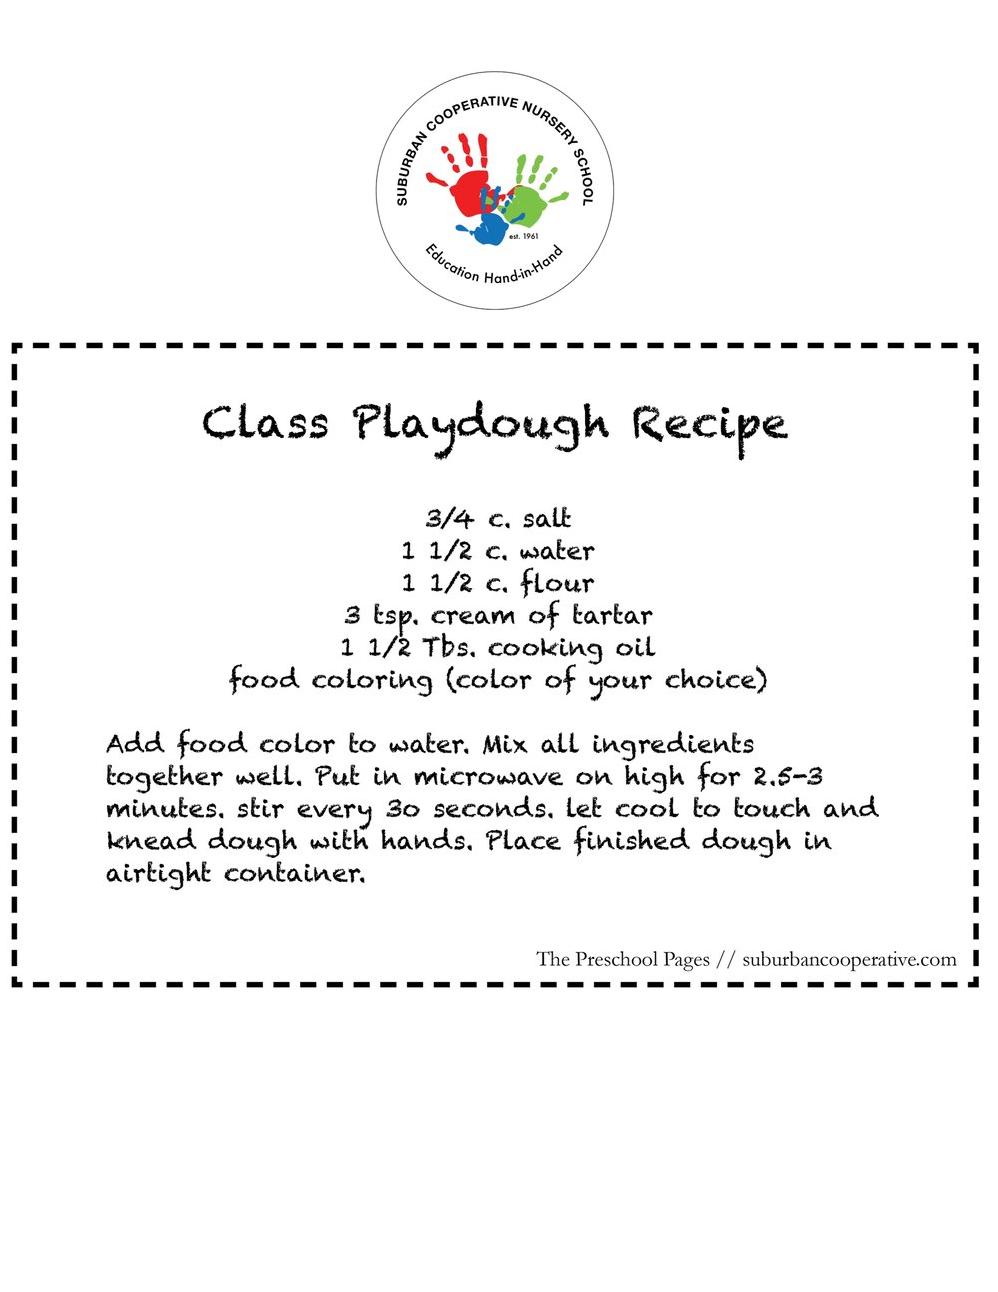  A colorful world of fun and creativity starts with this gluten-free play dough recipe.